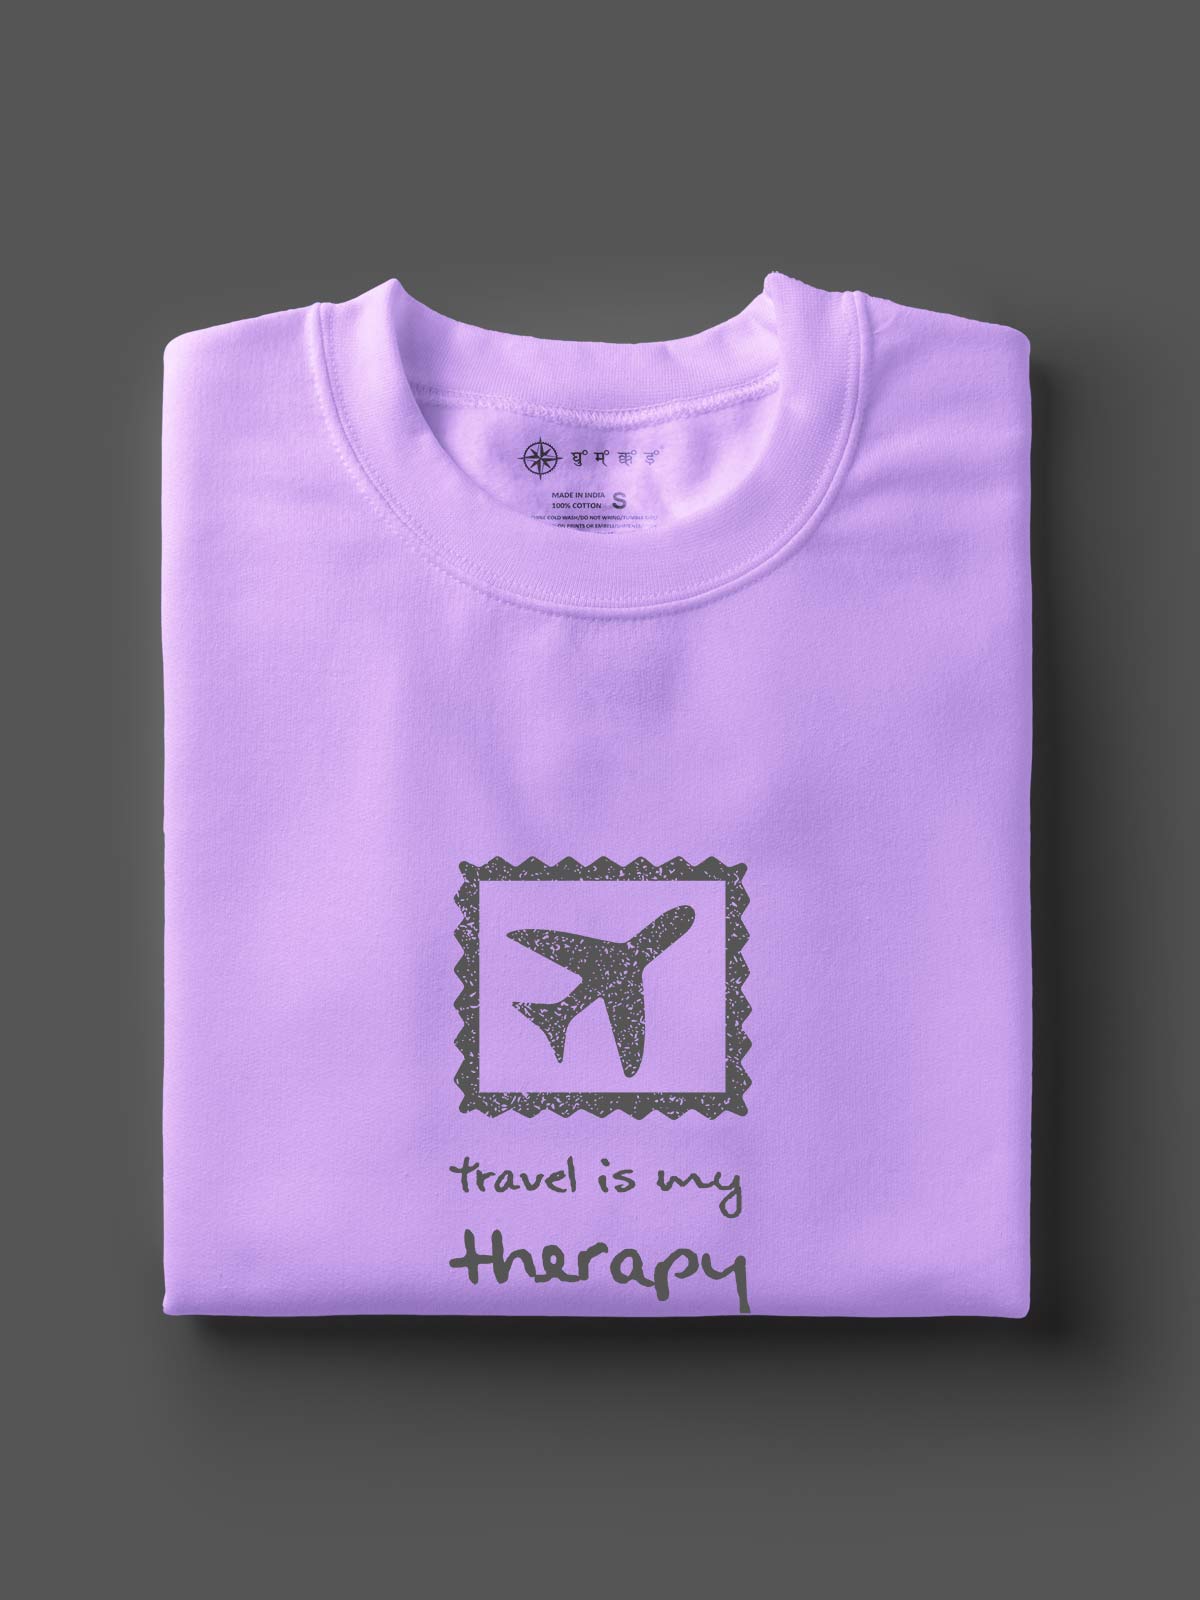 Travel-is-my-therapy-printed-t-shirt-for-men by Ghumakkad